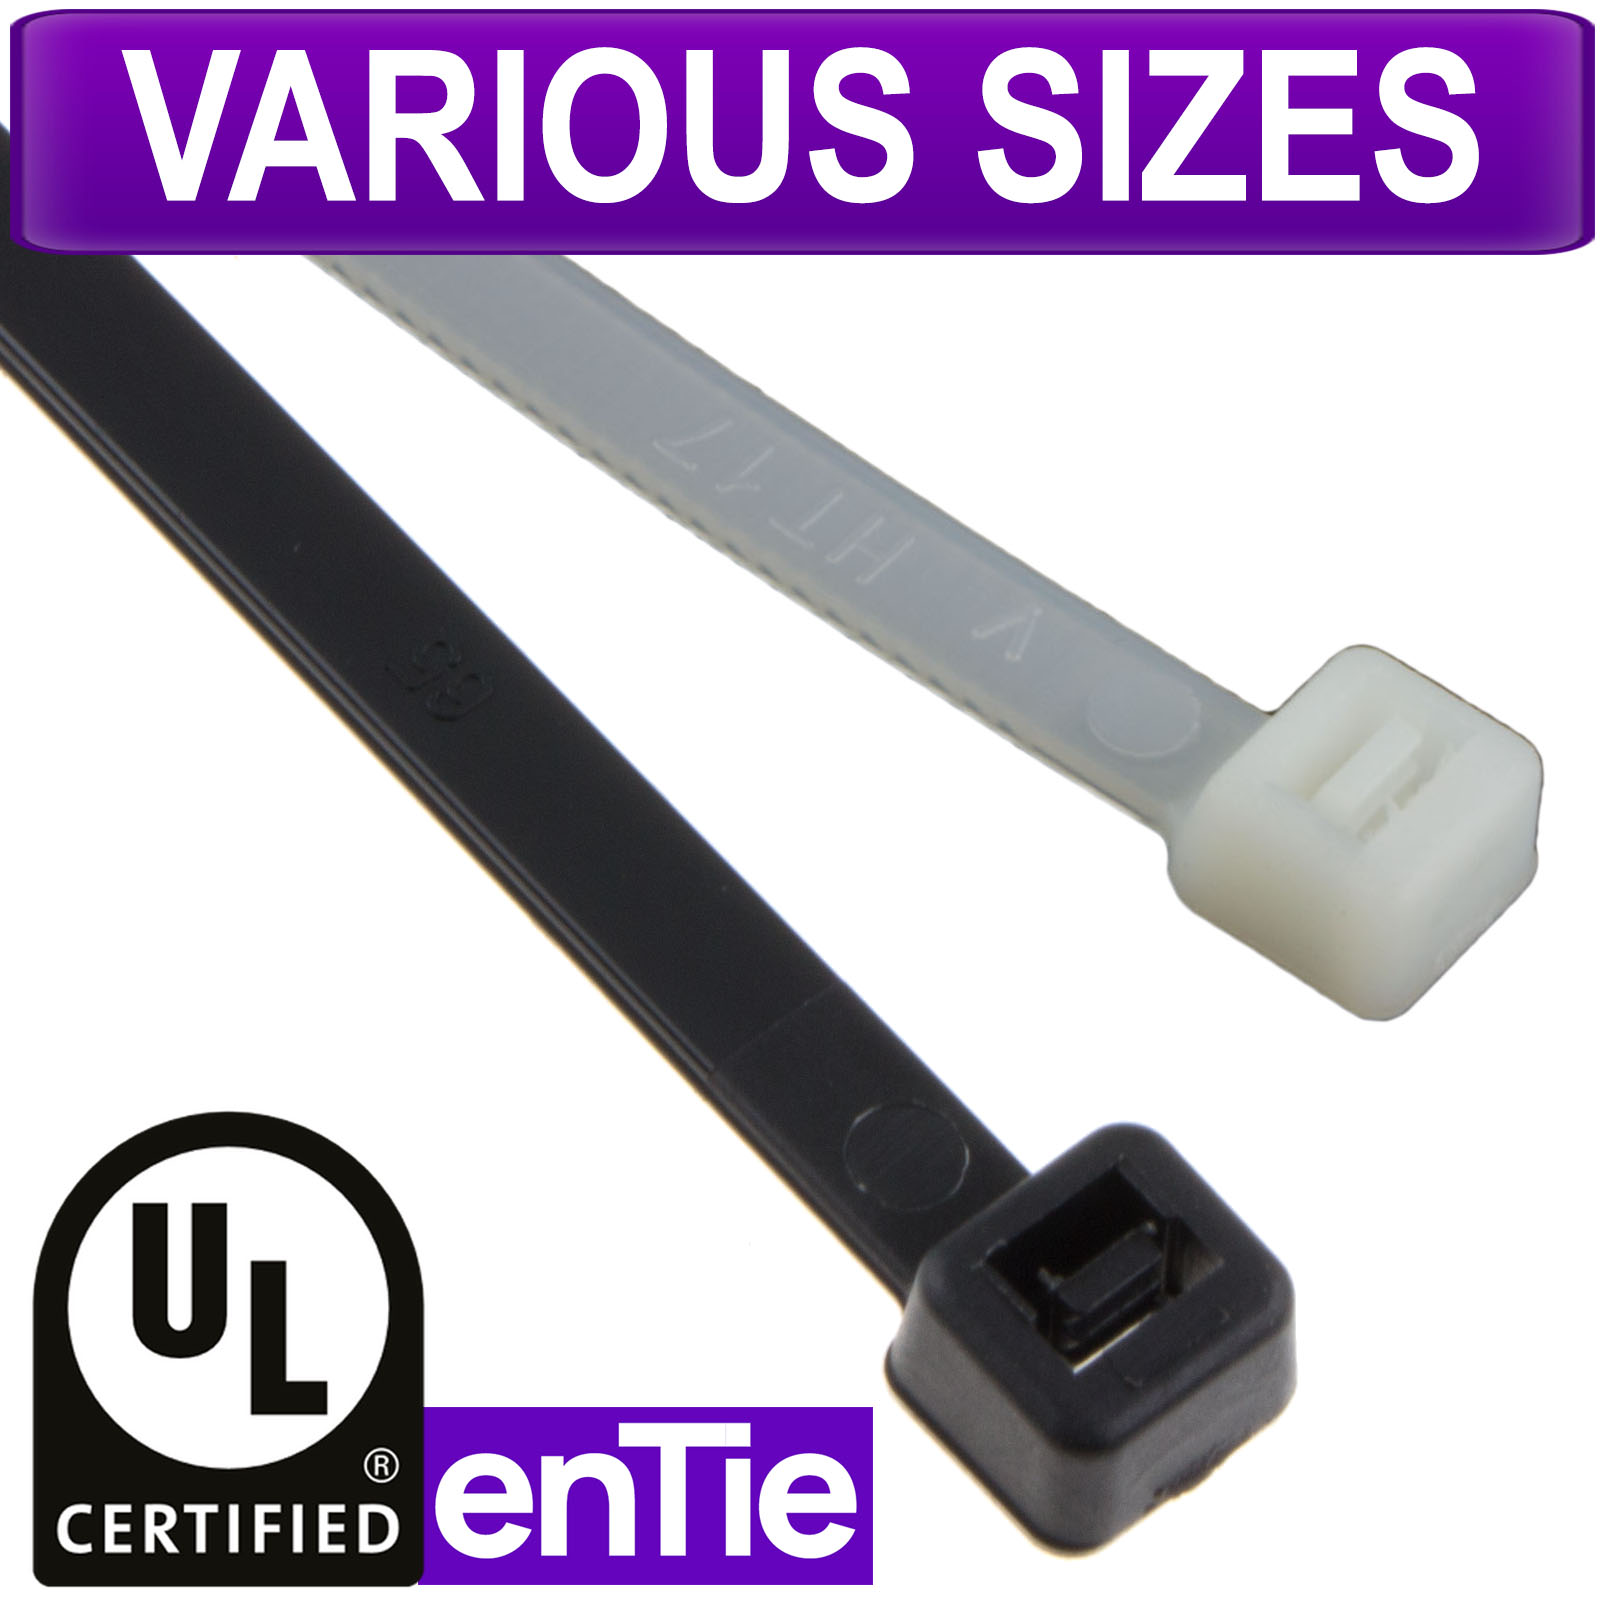 Cable Ties White//Natural Strong Tie Wraps-Zip Ties Nylon Small-Large Sizes